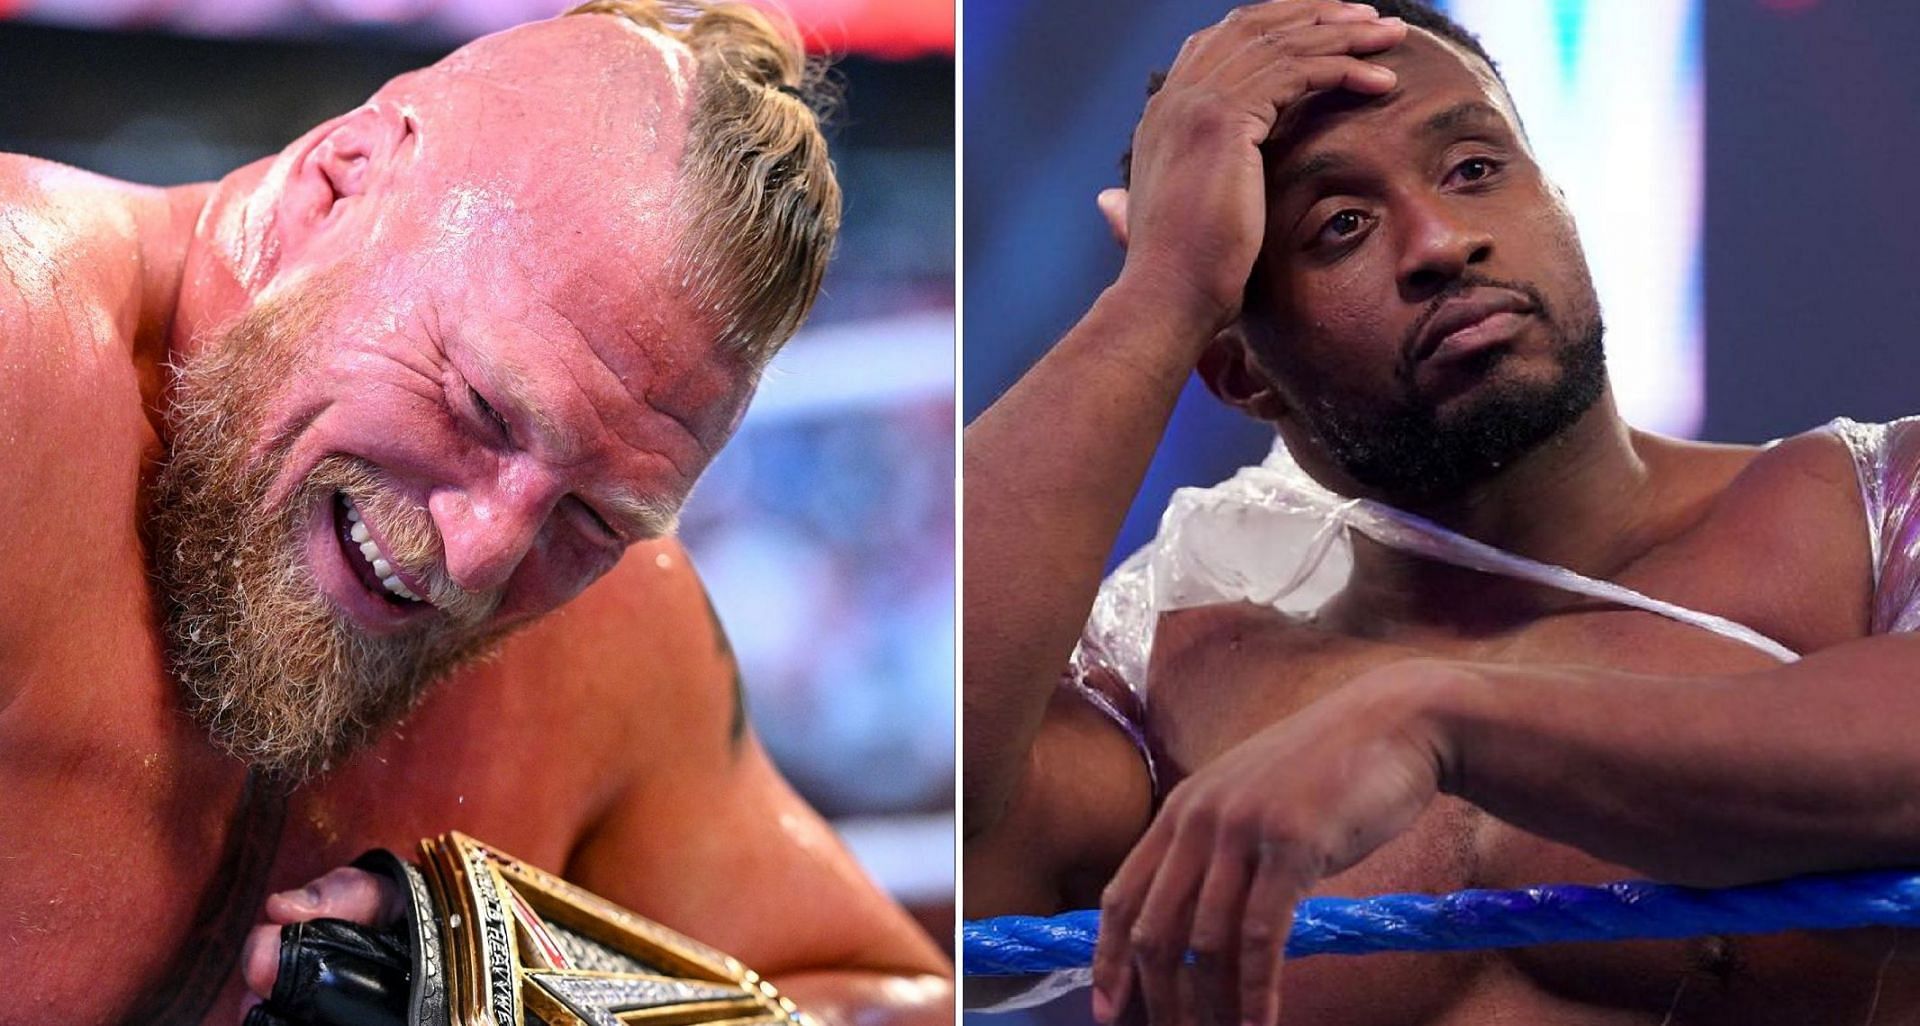 It was a night of contrasting emotions for Big E and Brock Lesnar